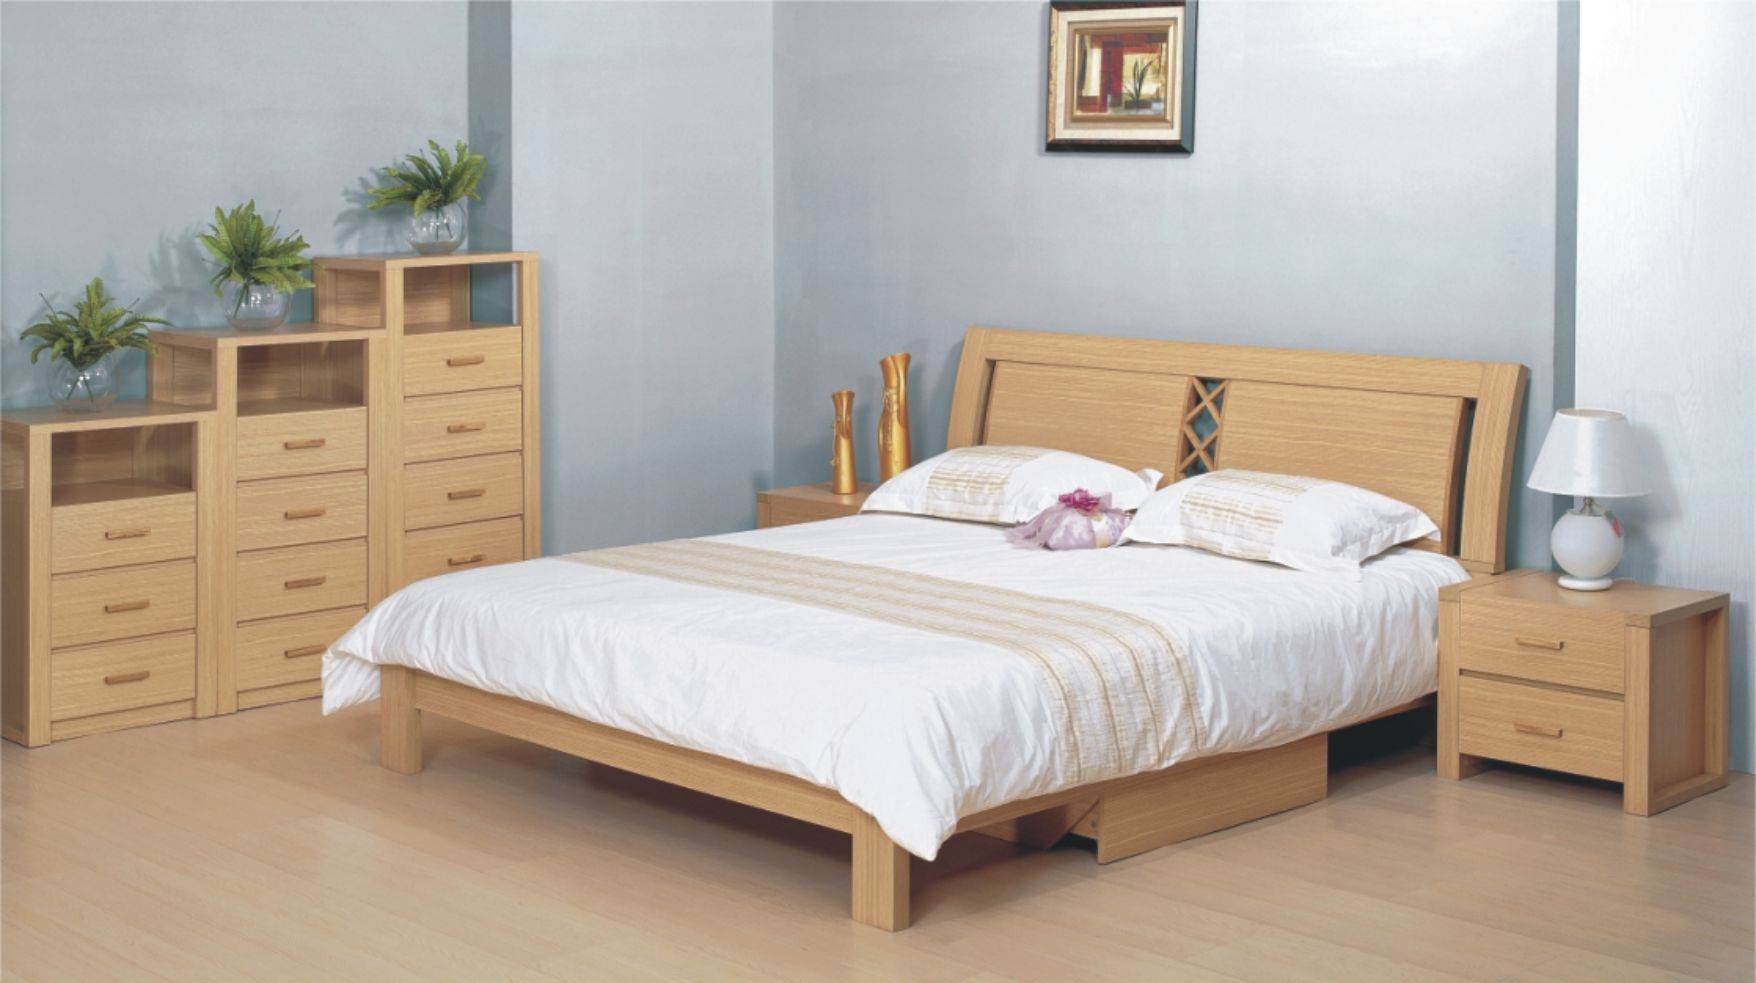 Beds picture design images